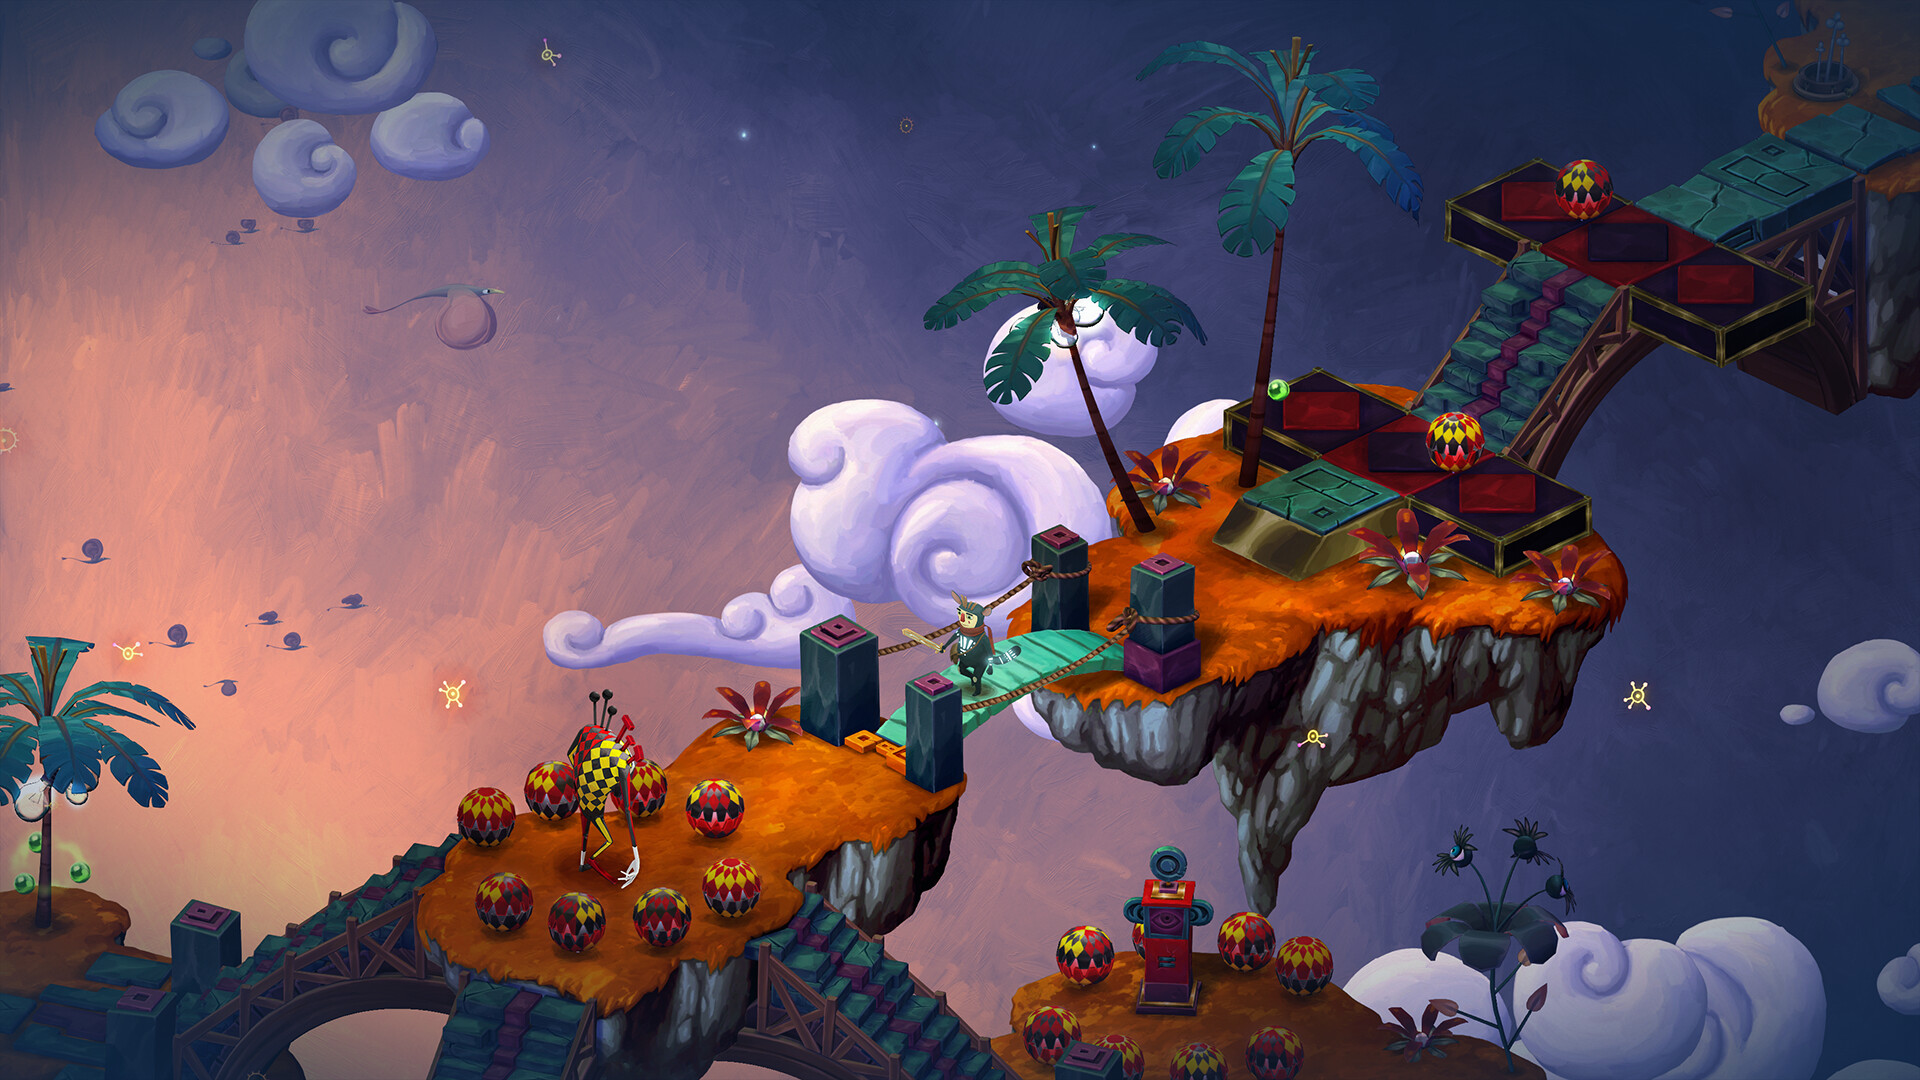 Figment 2: Creed Valley screenshot